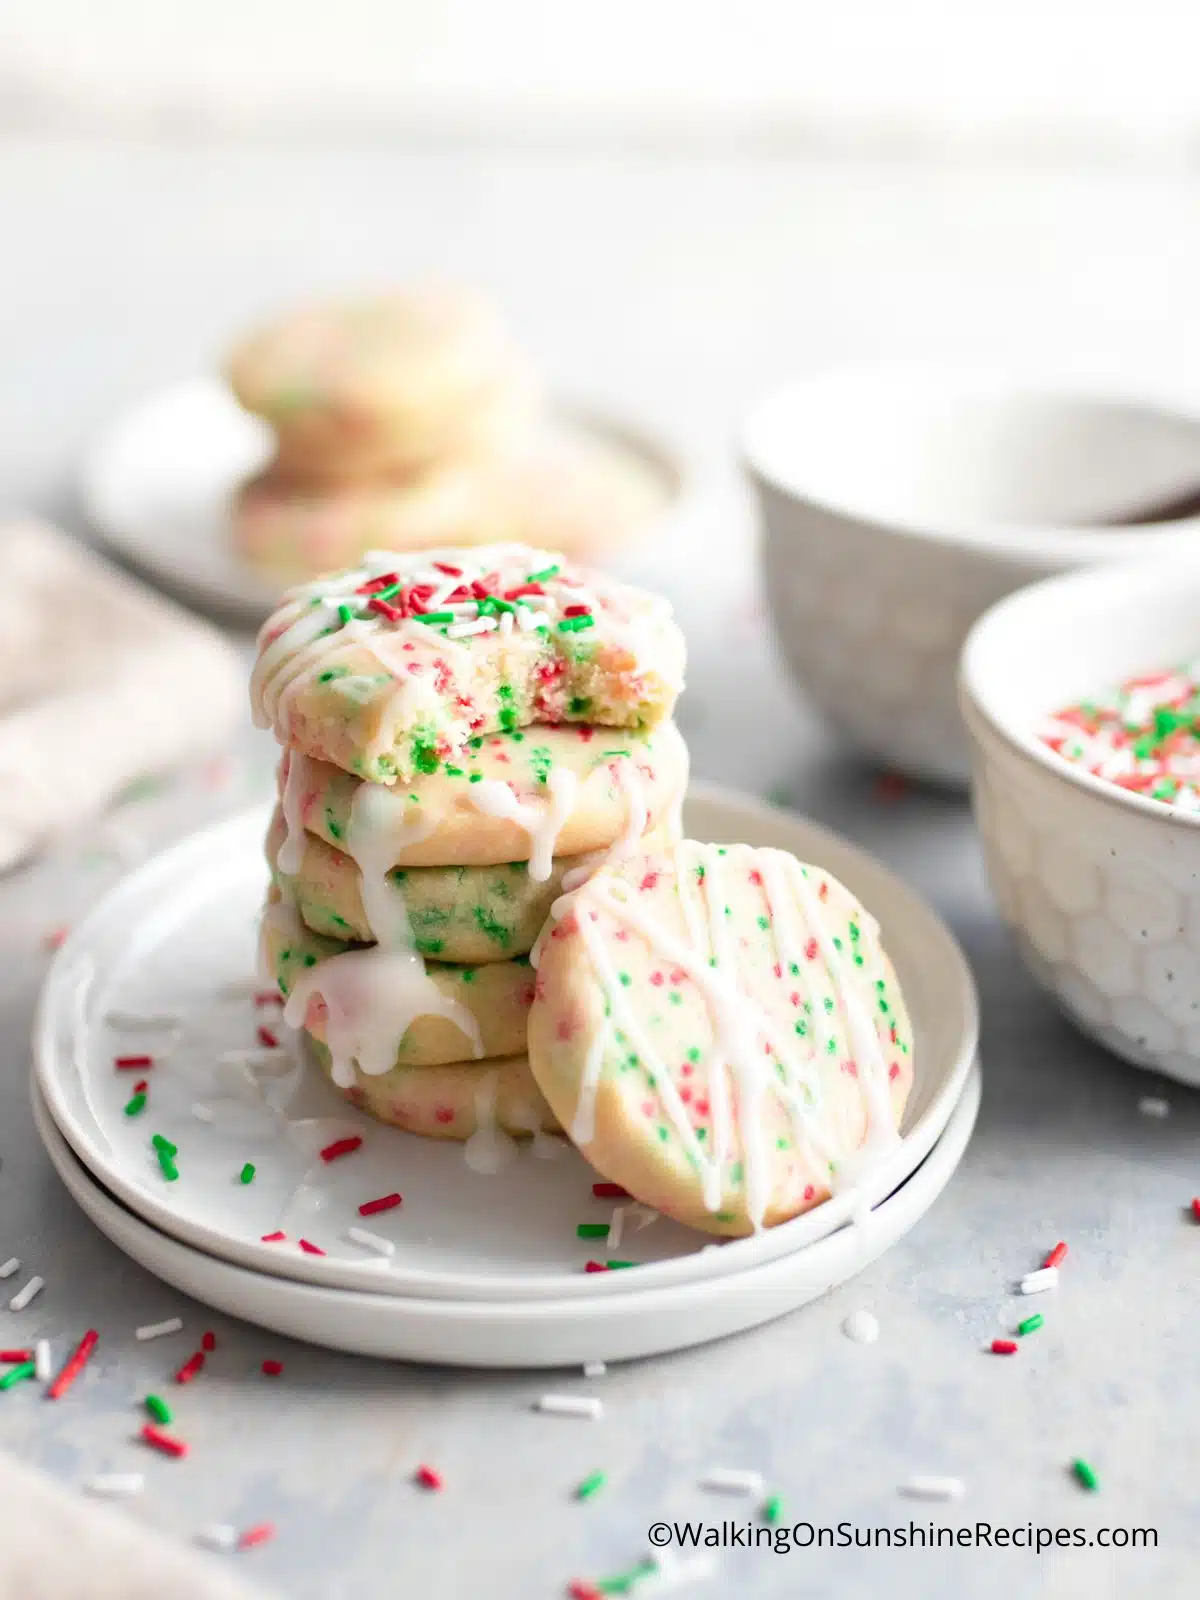 Stacked Christmas cookies with sprinkles and glaze on plate.